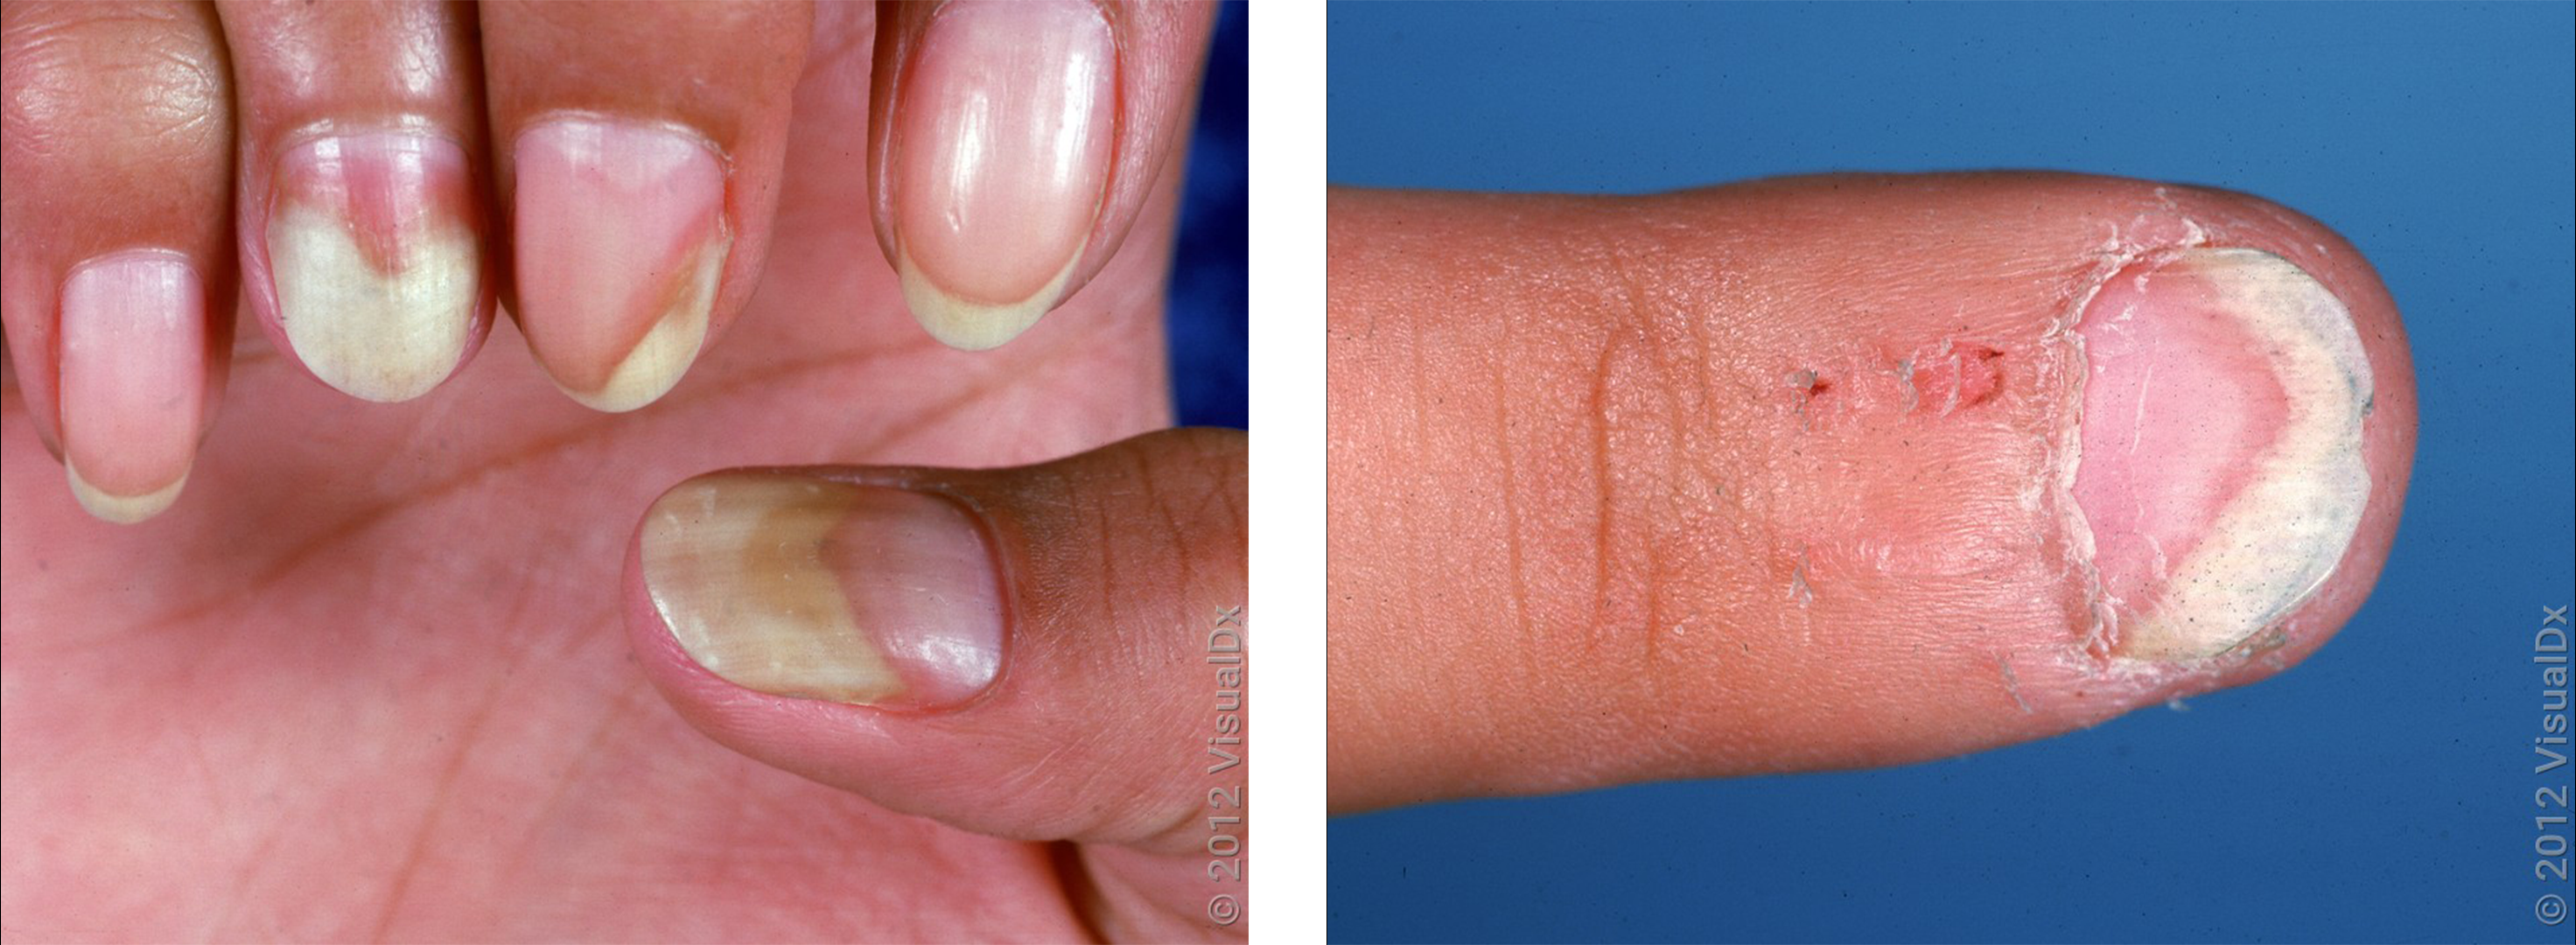 Nail Abnormalities: Causes, Symptoms, and Treatment Options